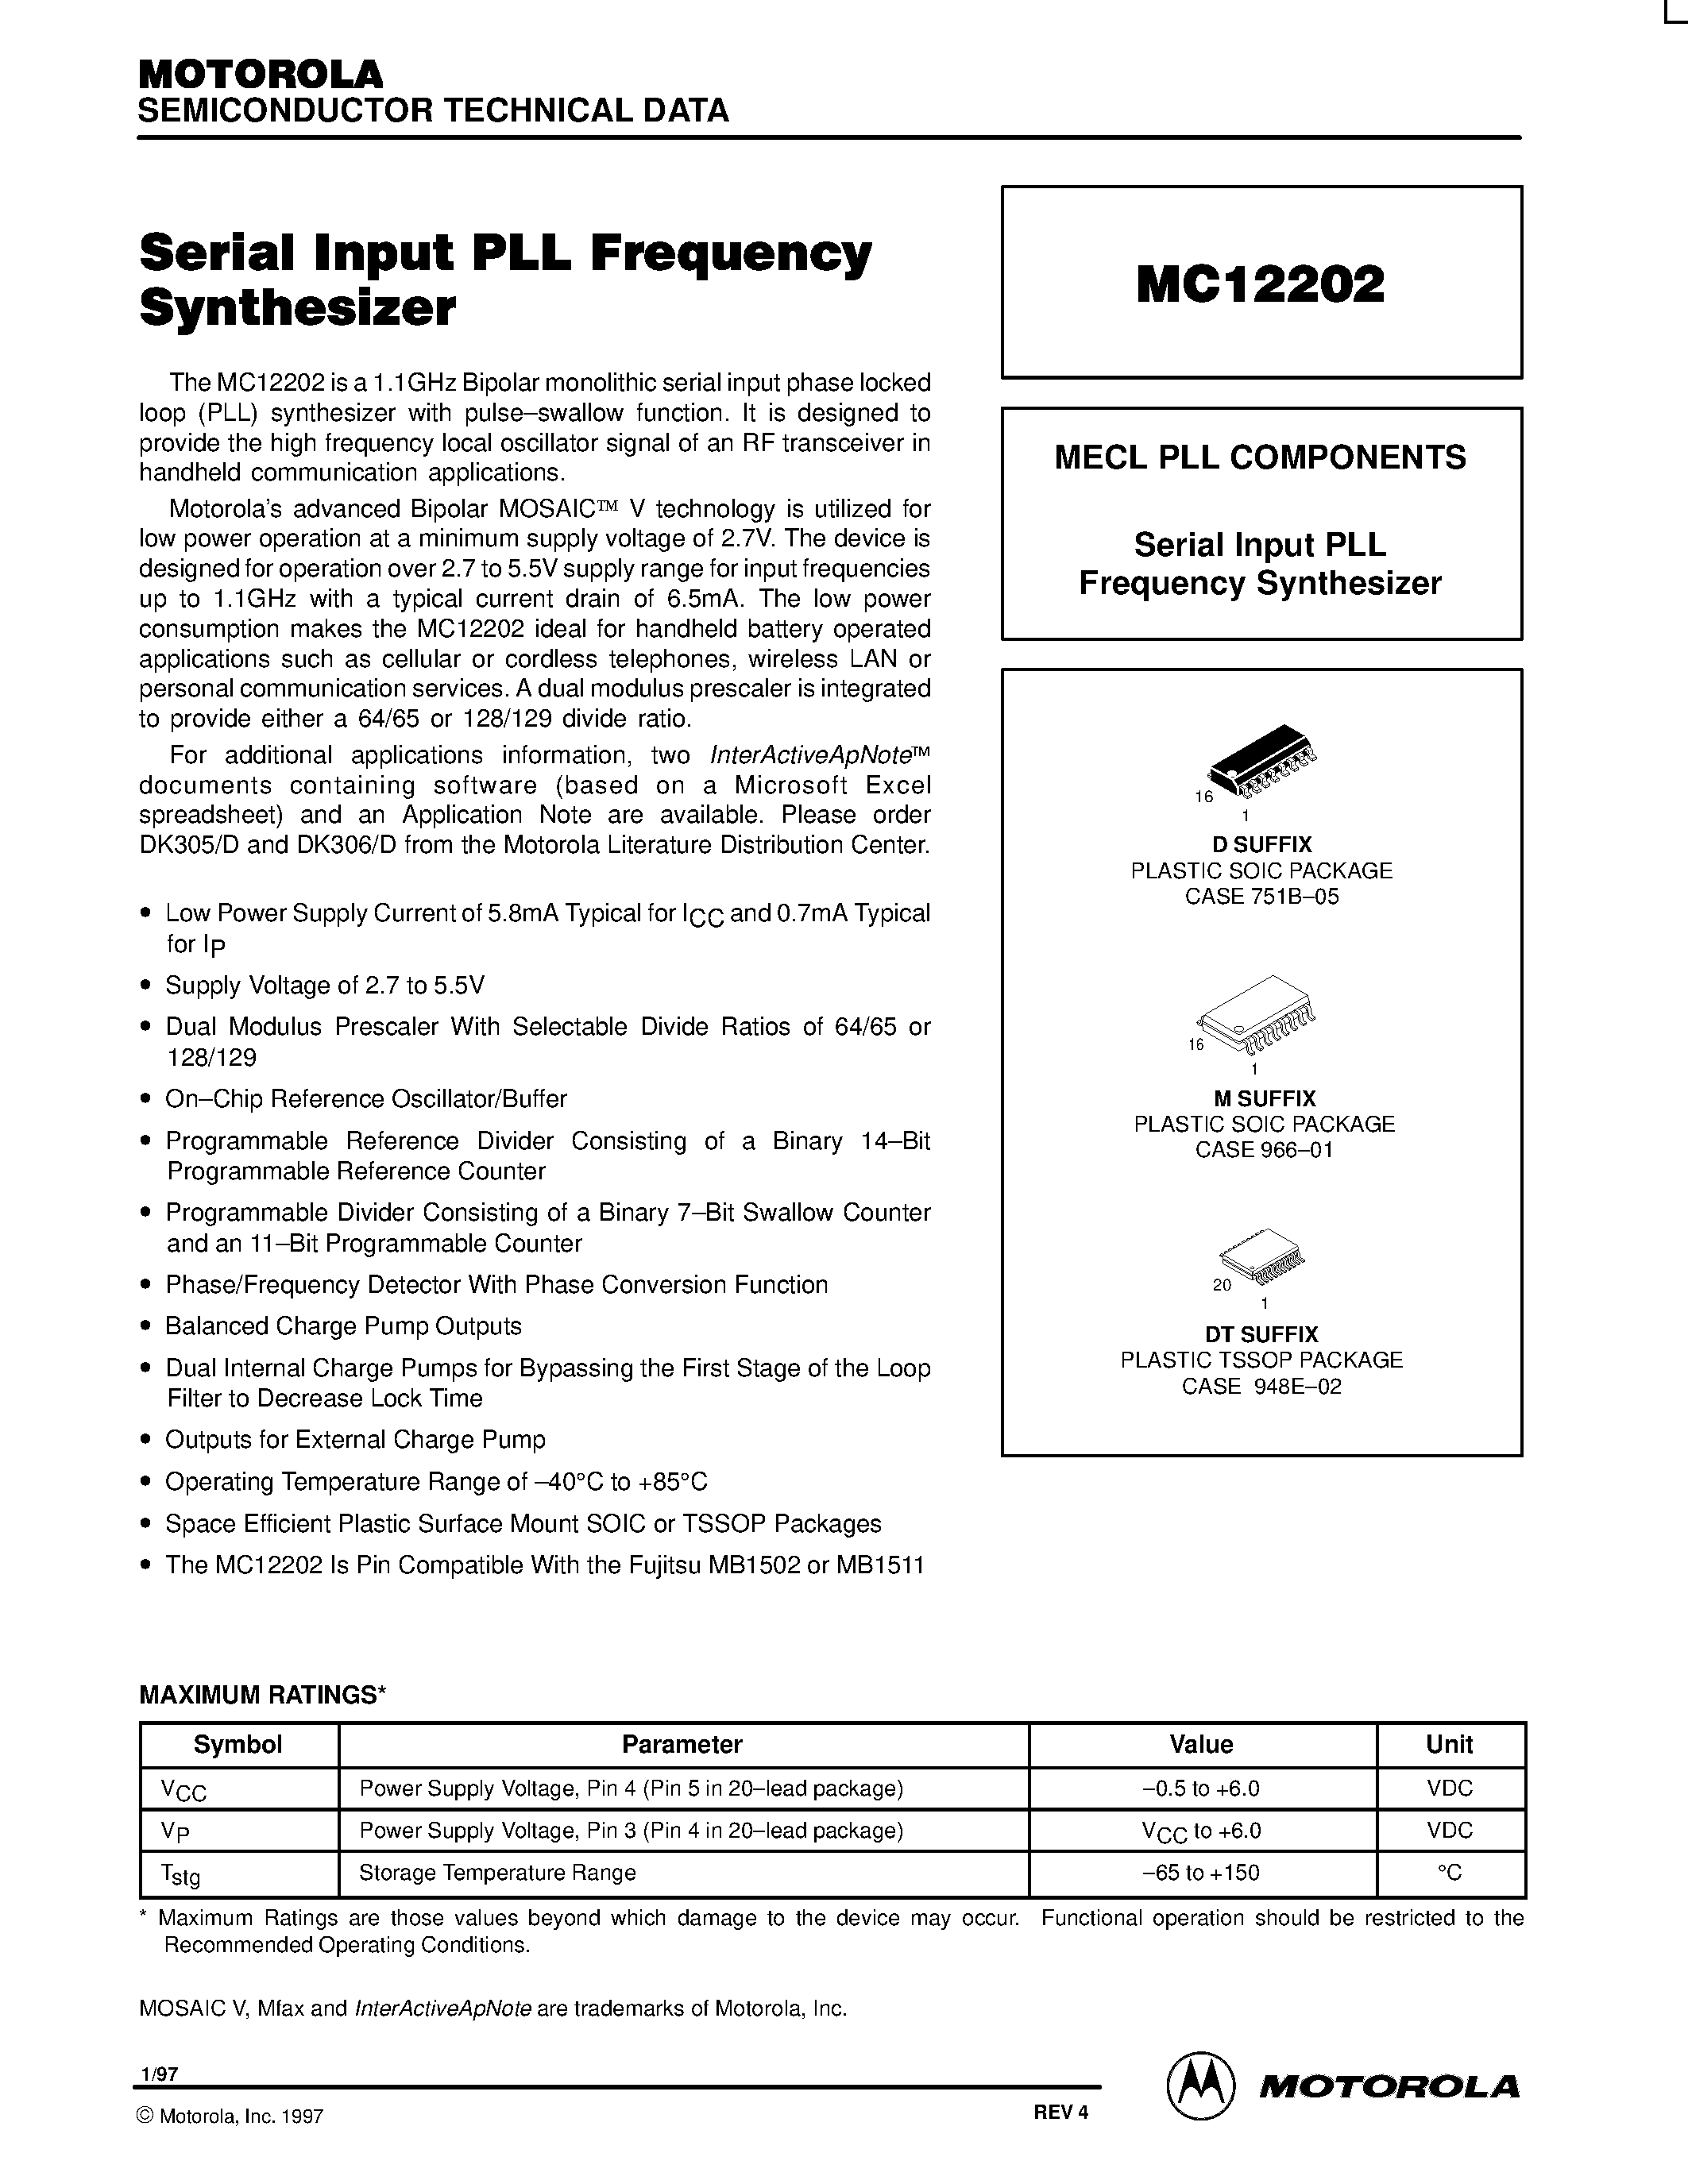 Datasheet MC12202M - MECL PLL COMPONENTS Serial Input PLL Frequency Synthesizer page 1